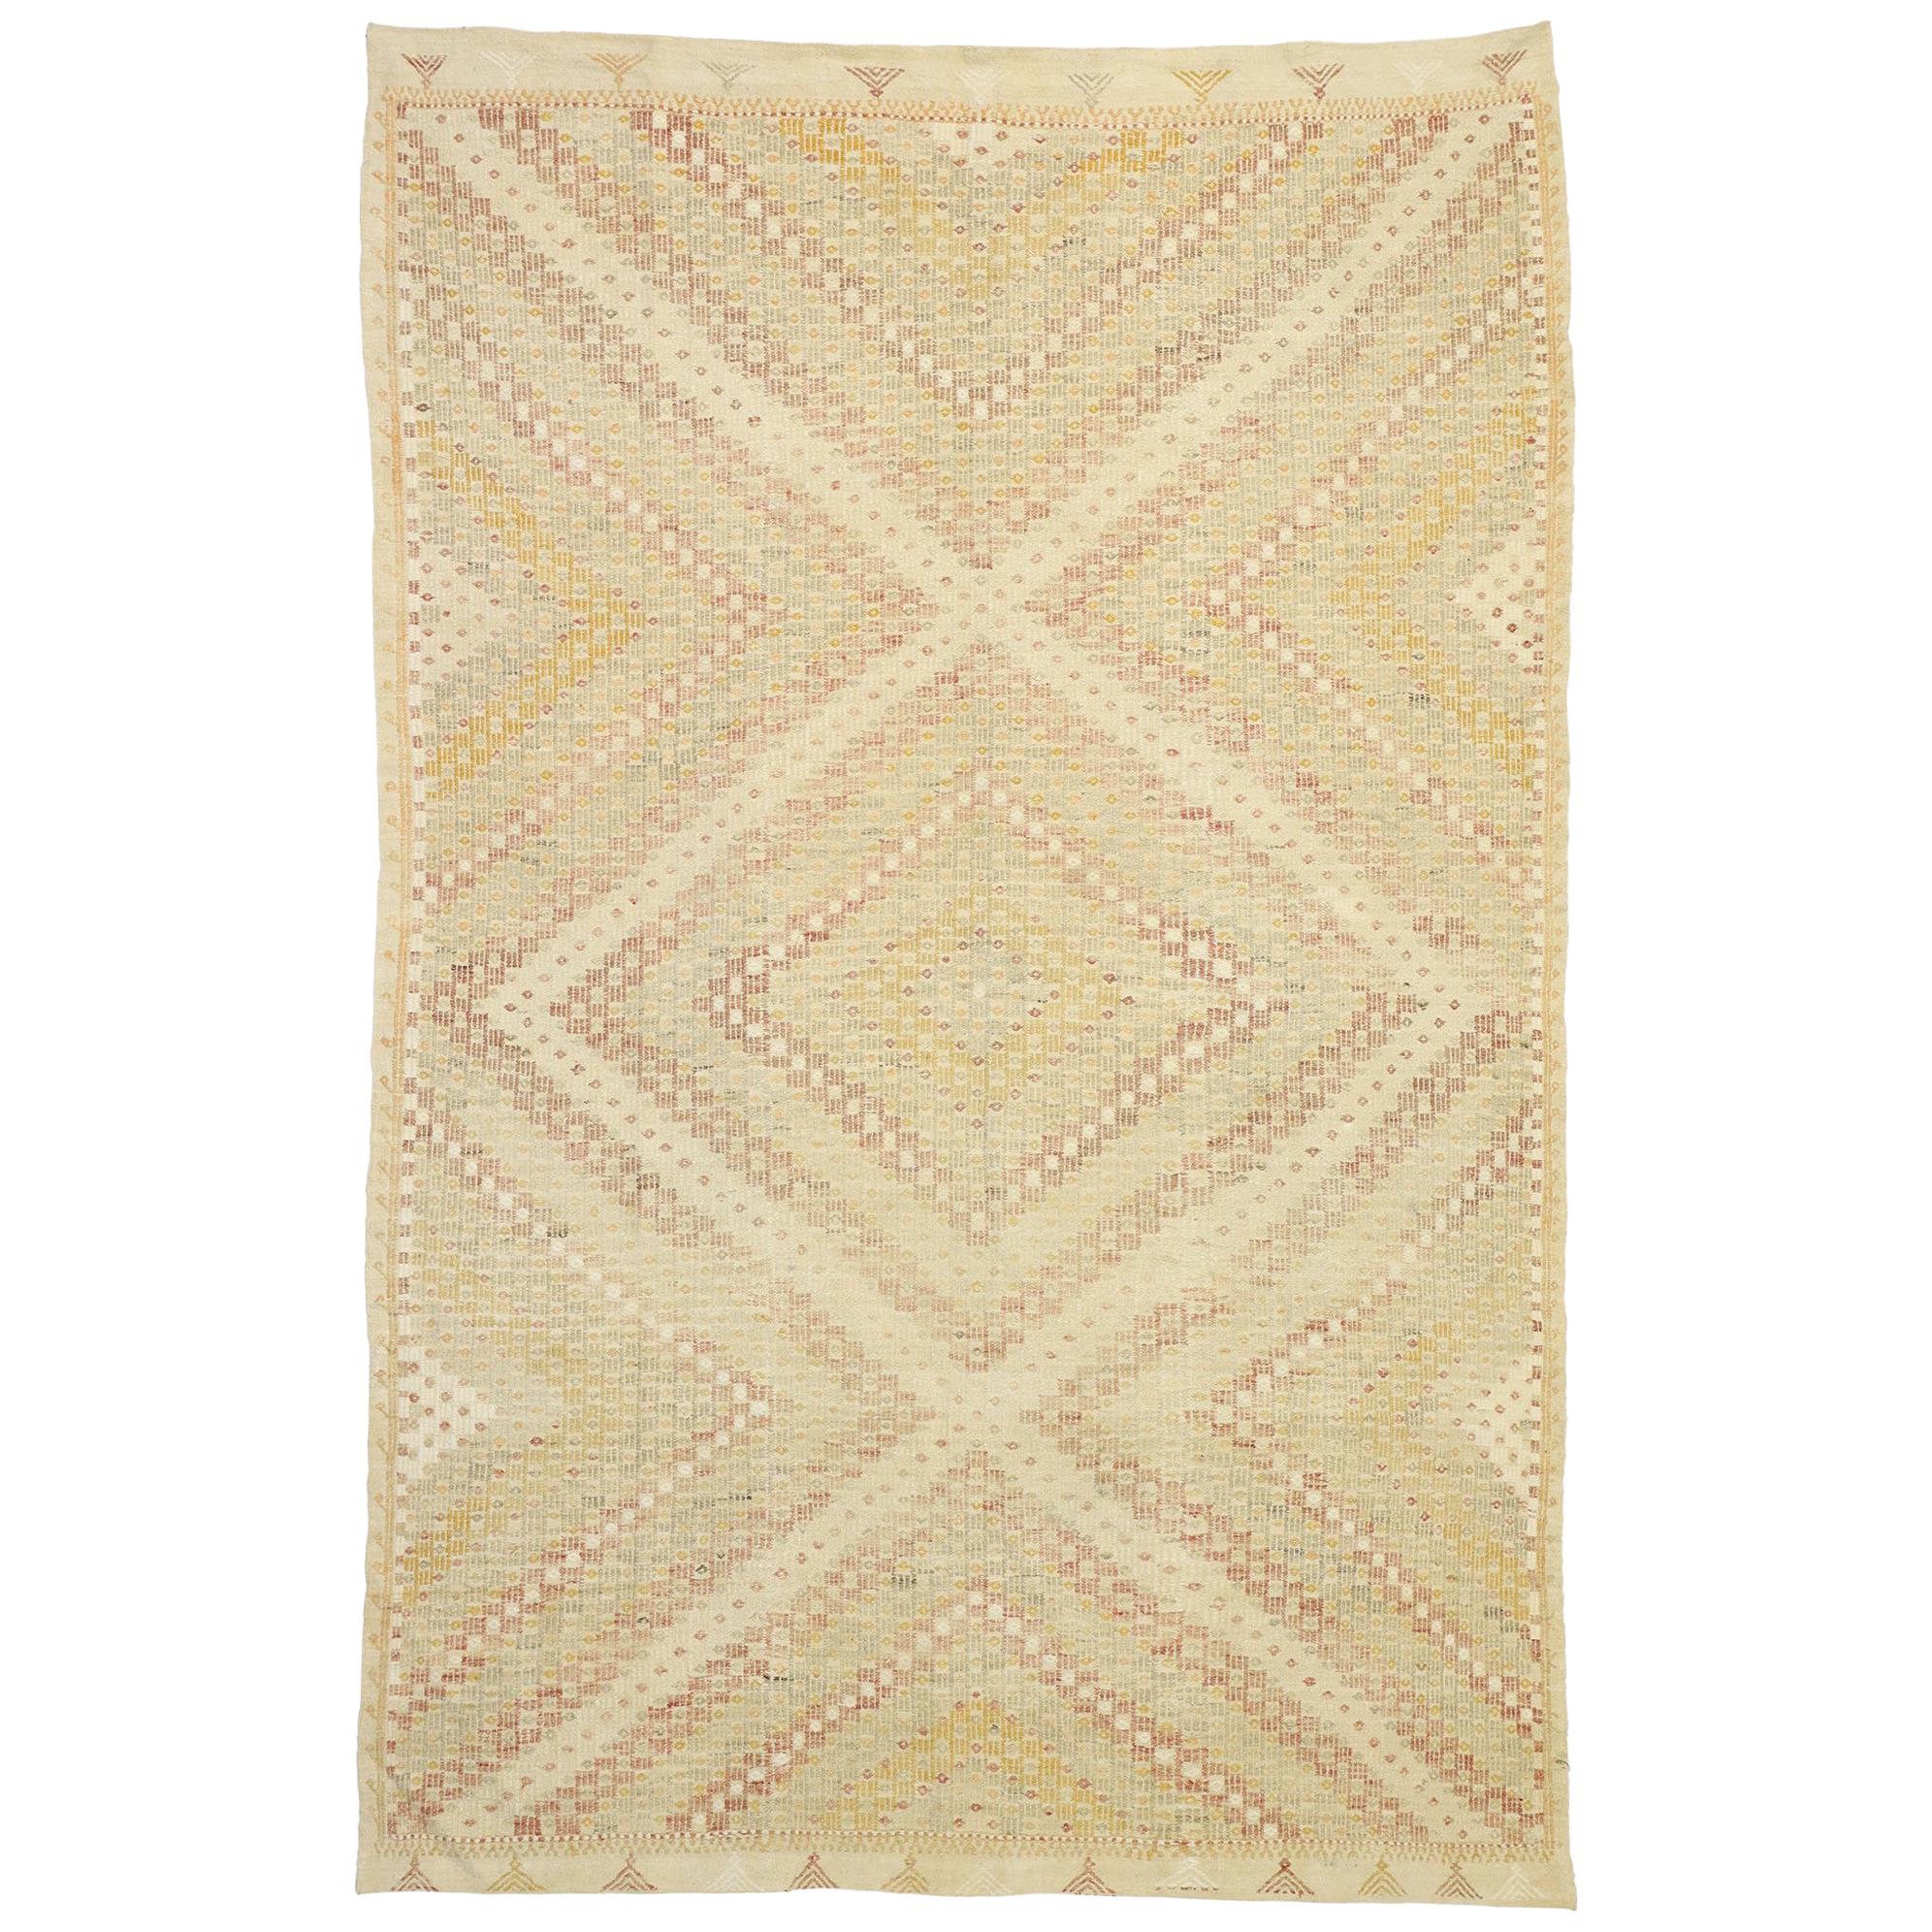 Distressed Vintage Turkish Kilim Rug with Southern Living Style For Sale